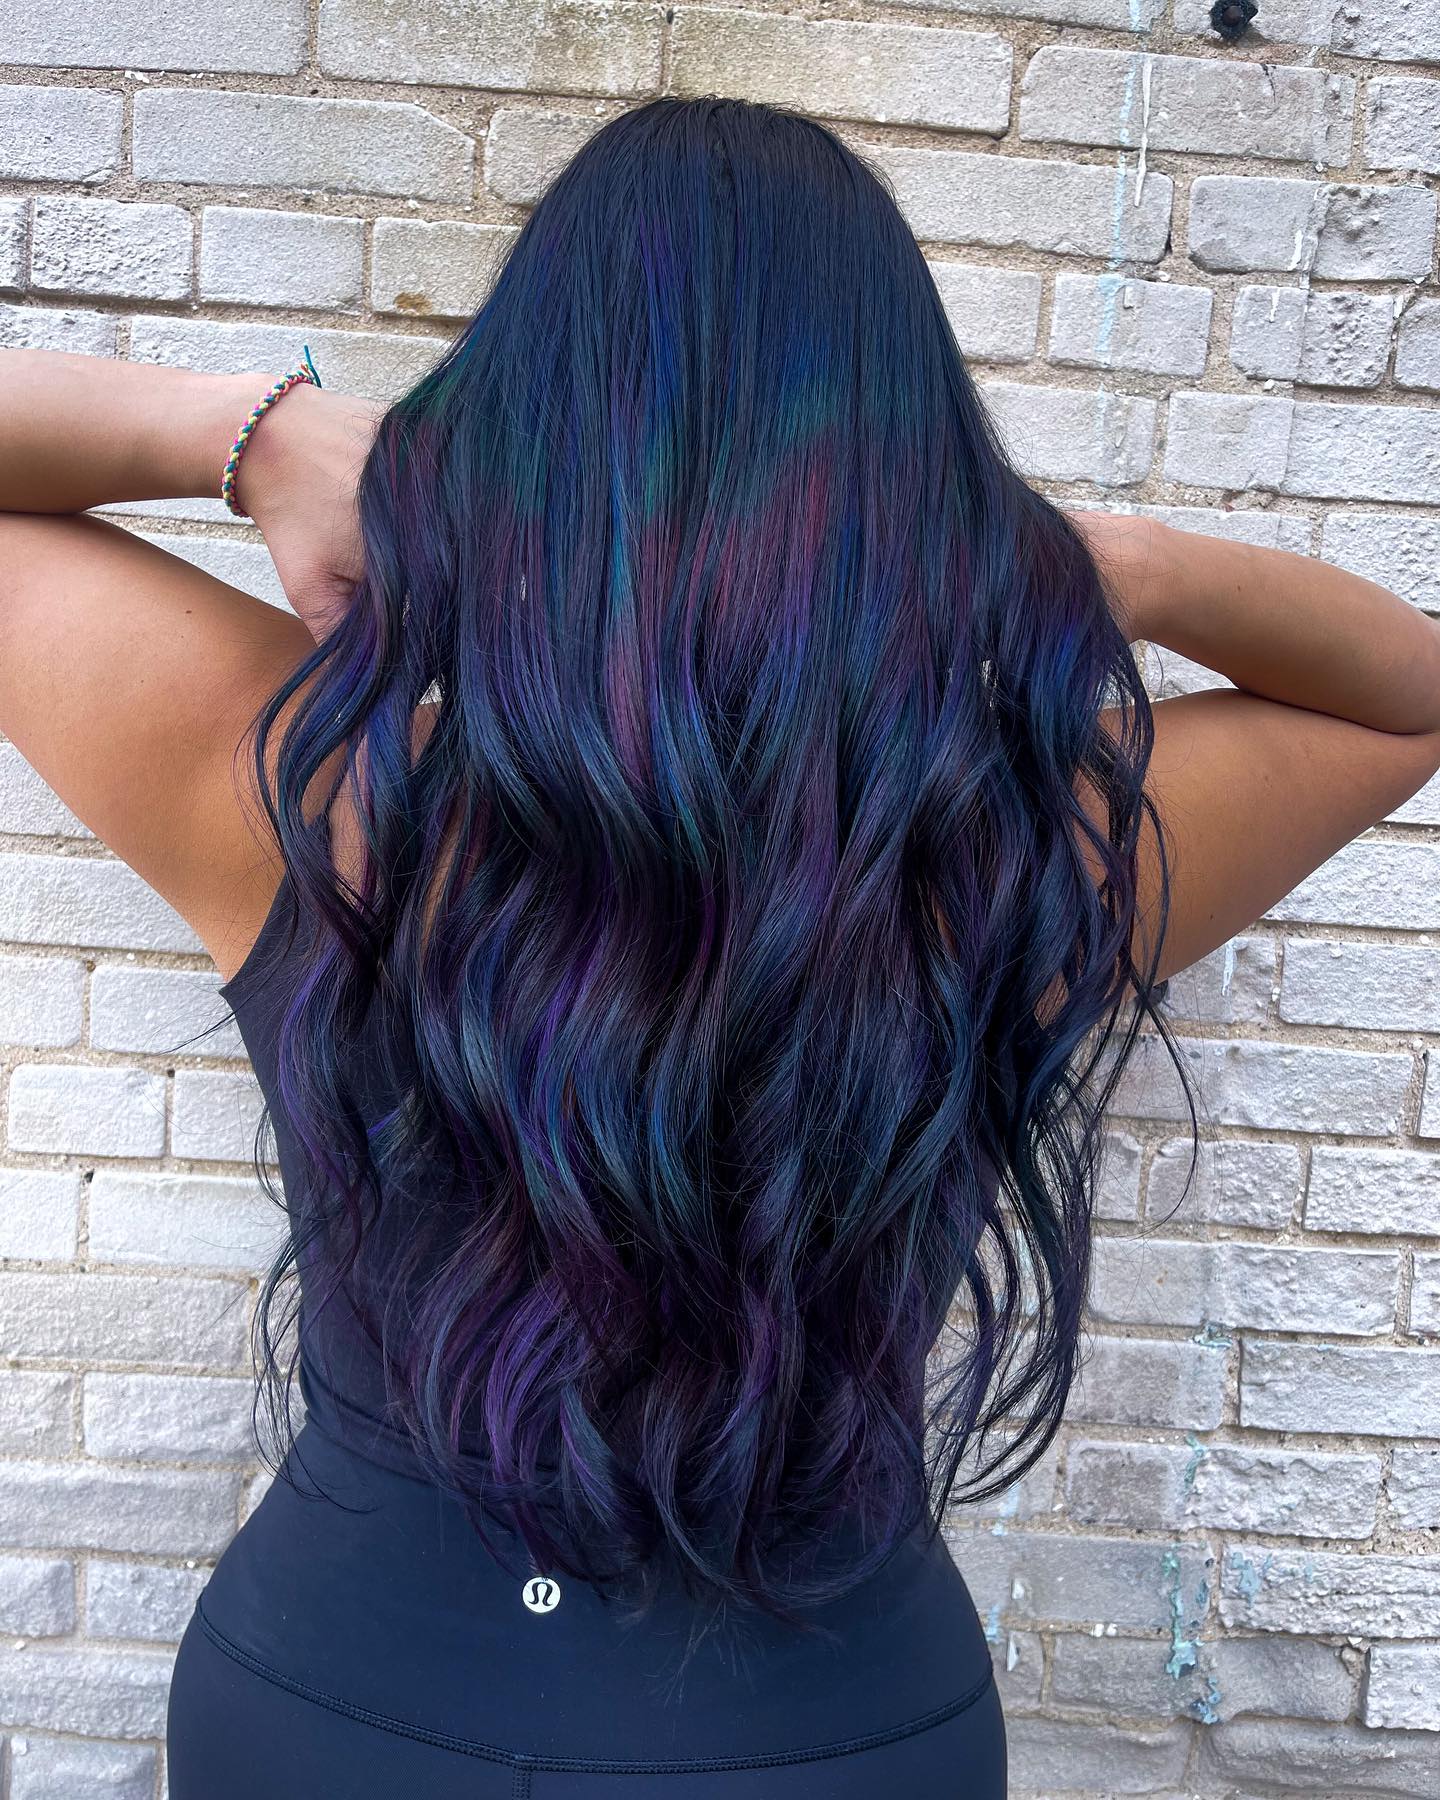 Oil Slick Hair With Muted Colors